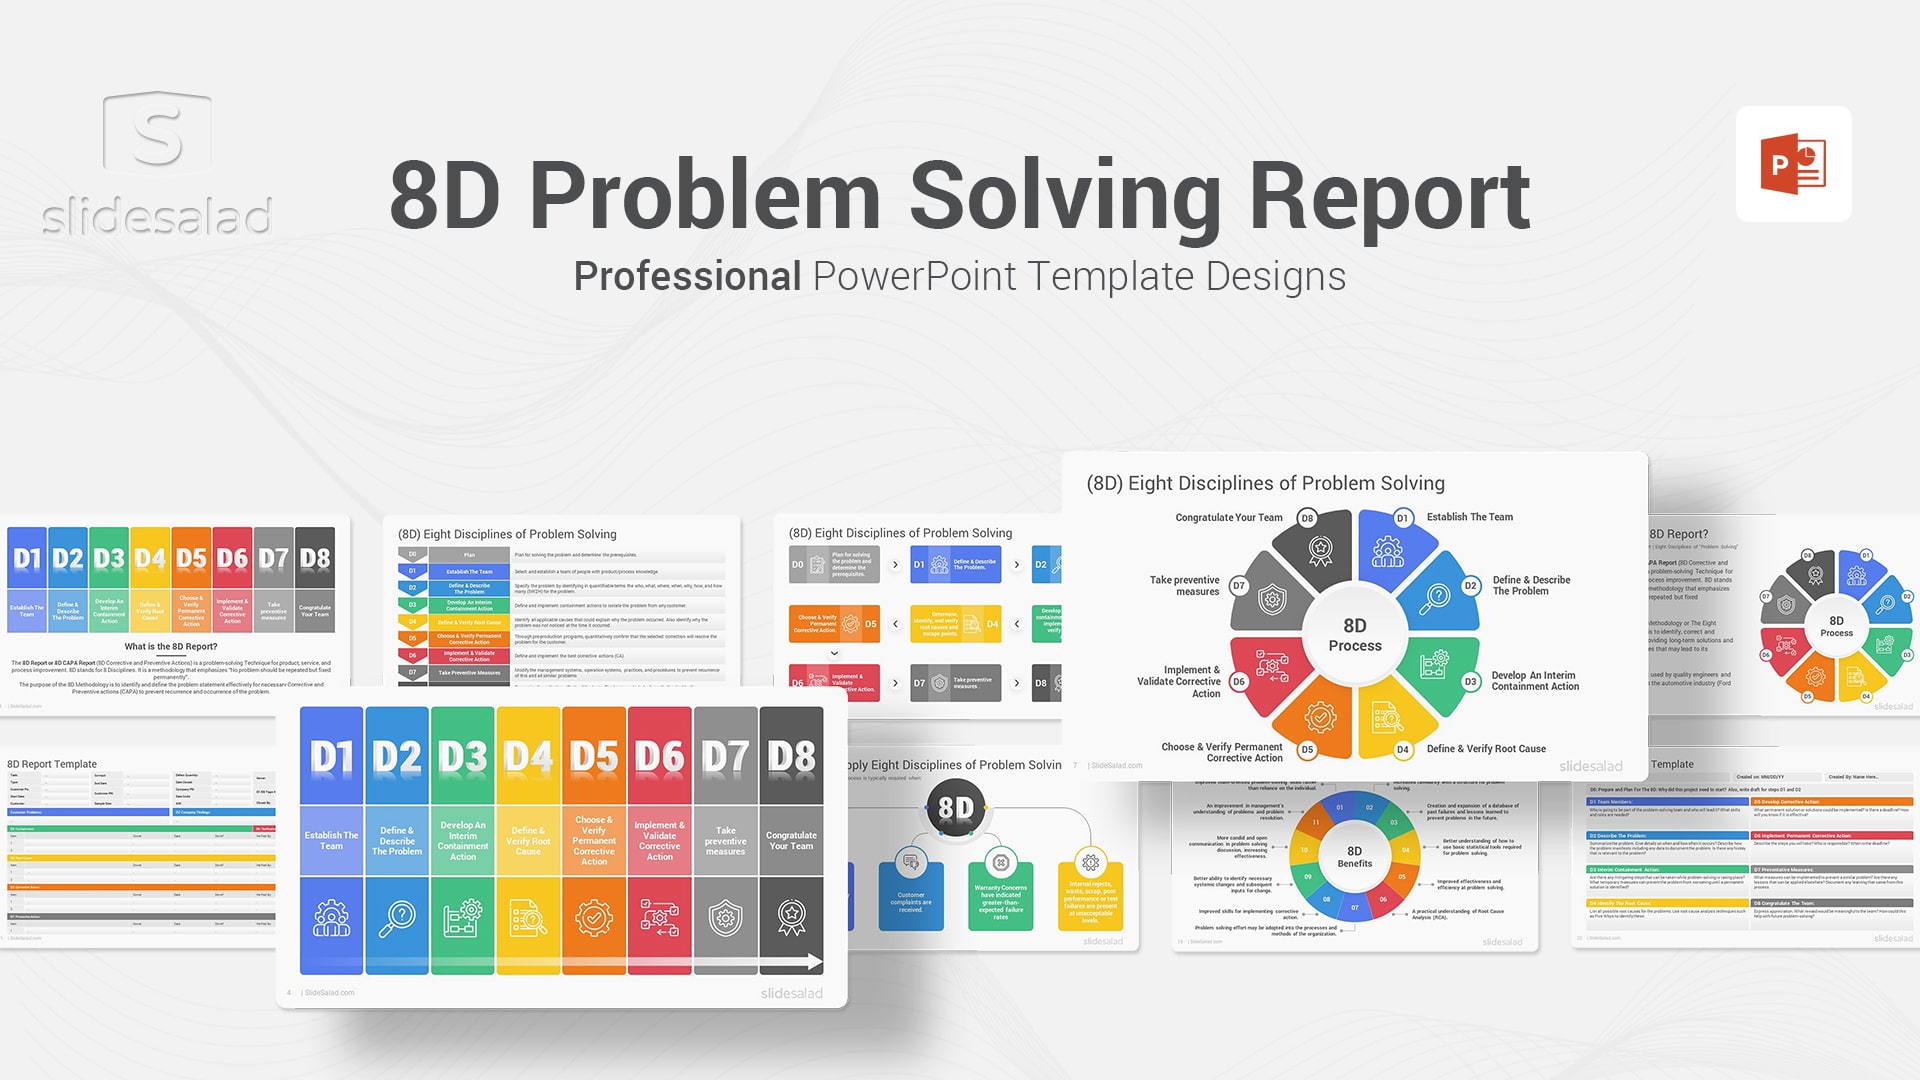 8D Problem Solving Report PowerPoint Template - Create a Stunning Presentation for Learning the 8D Problem Solving Report Process to Save Your Business